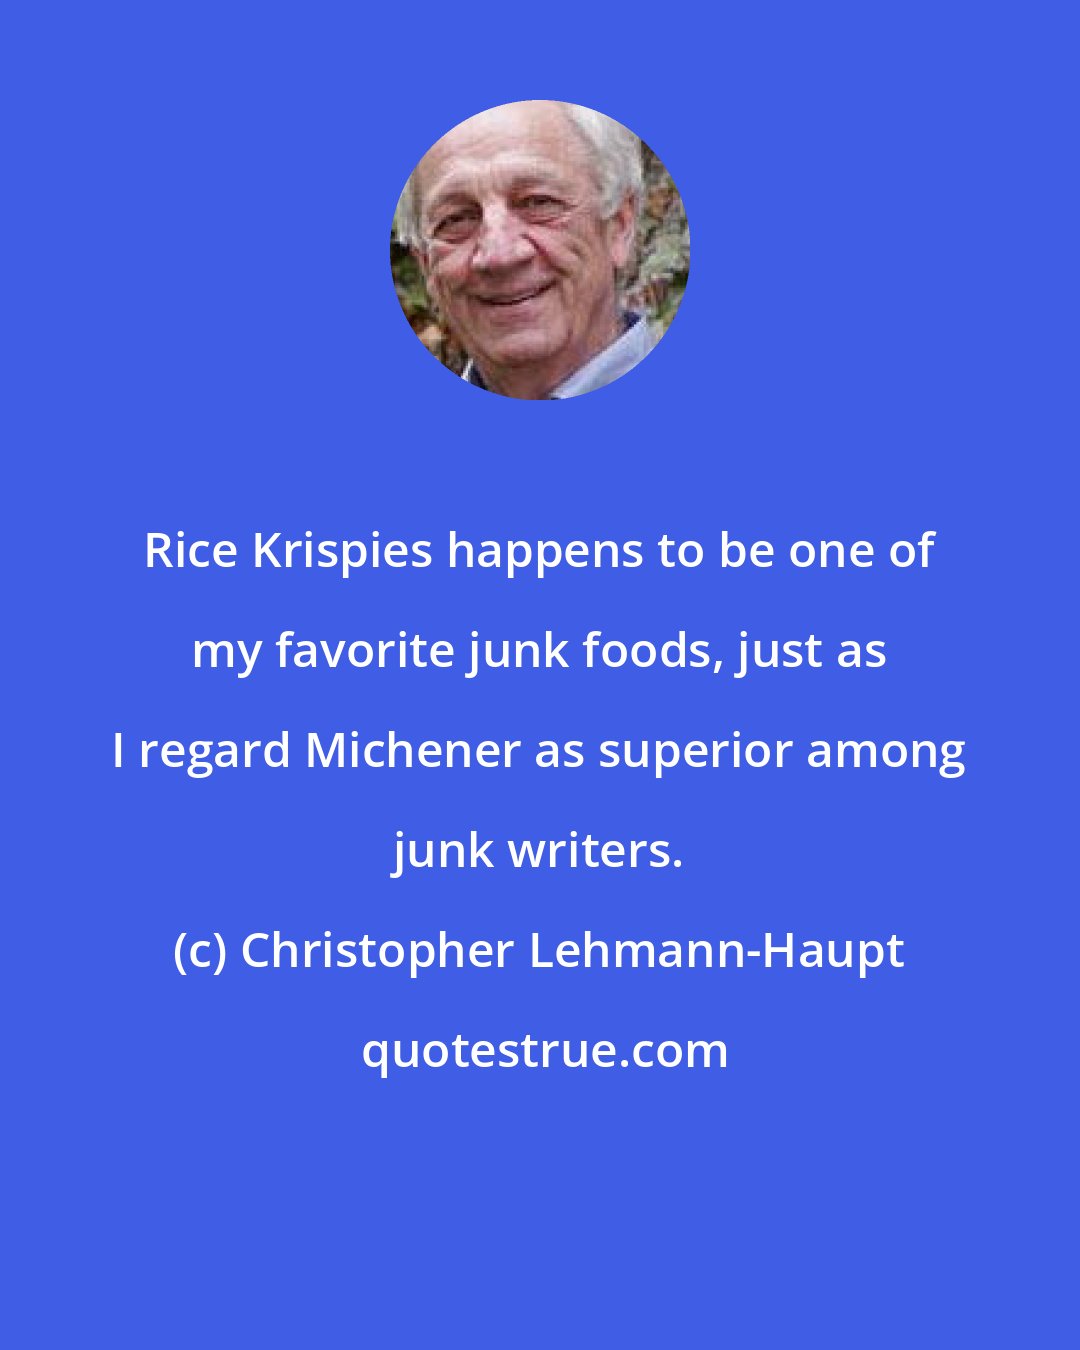 Christopher Lehmann-Haupt: Rice Krispies happens to be one of my favorite junk foods, just as I regard Michener as superior among junk writers.